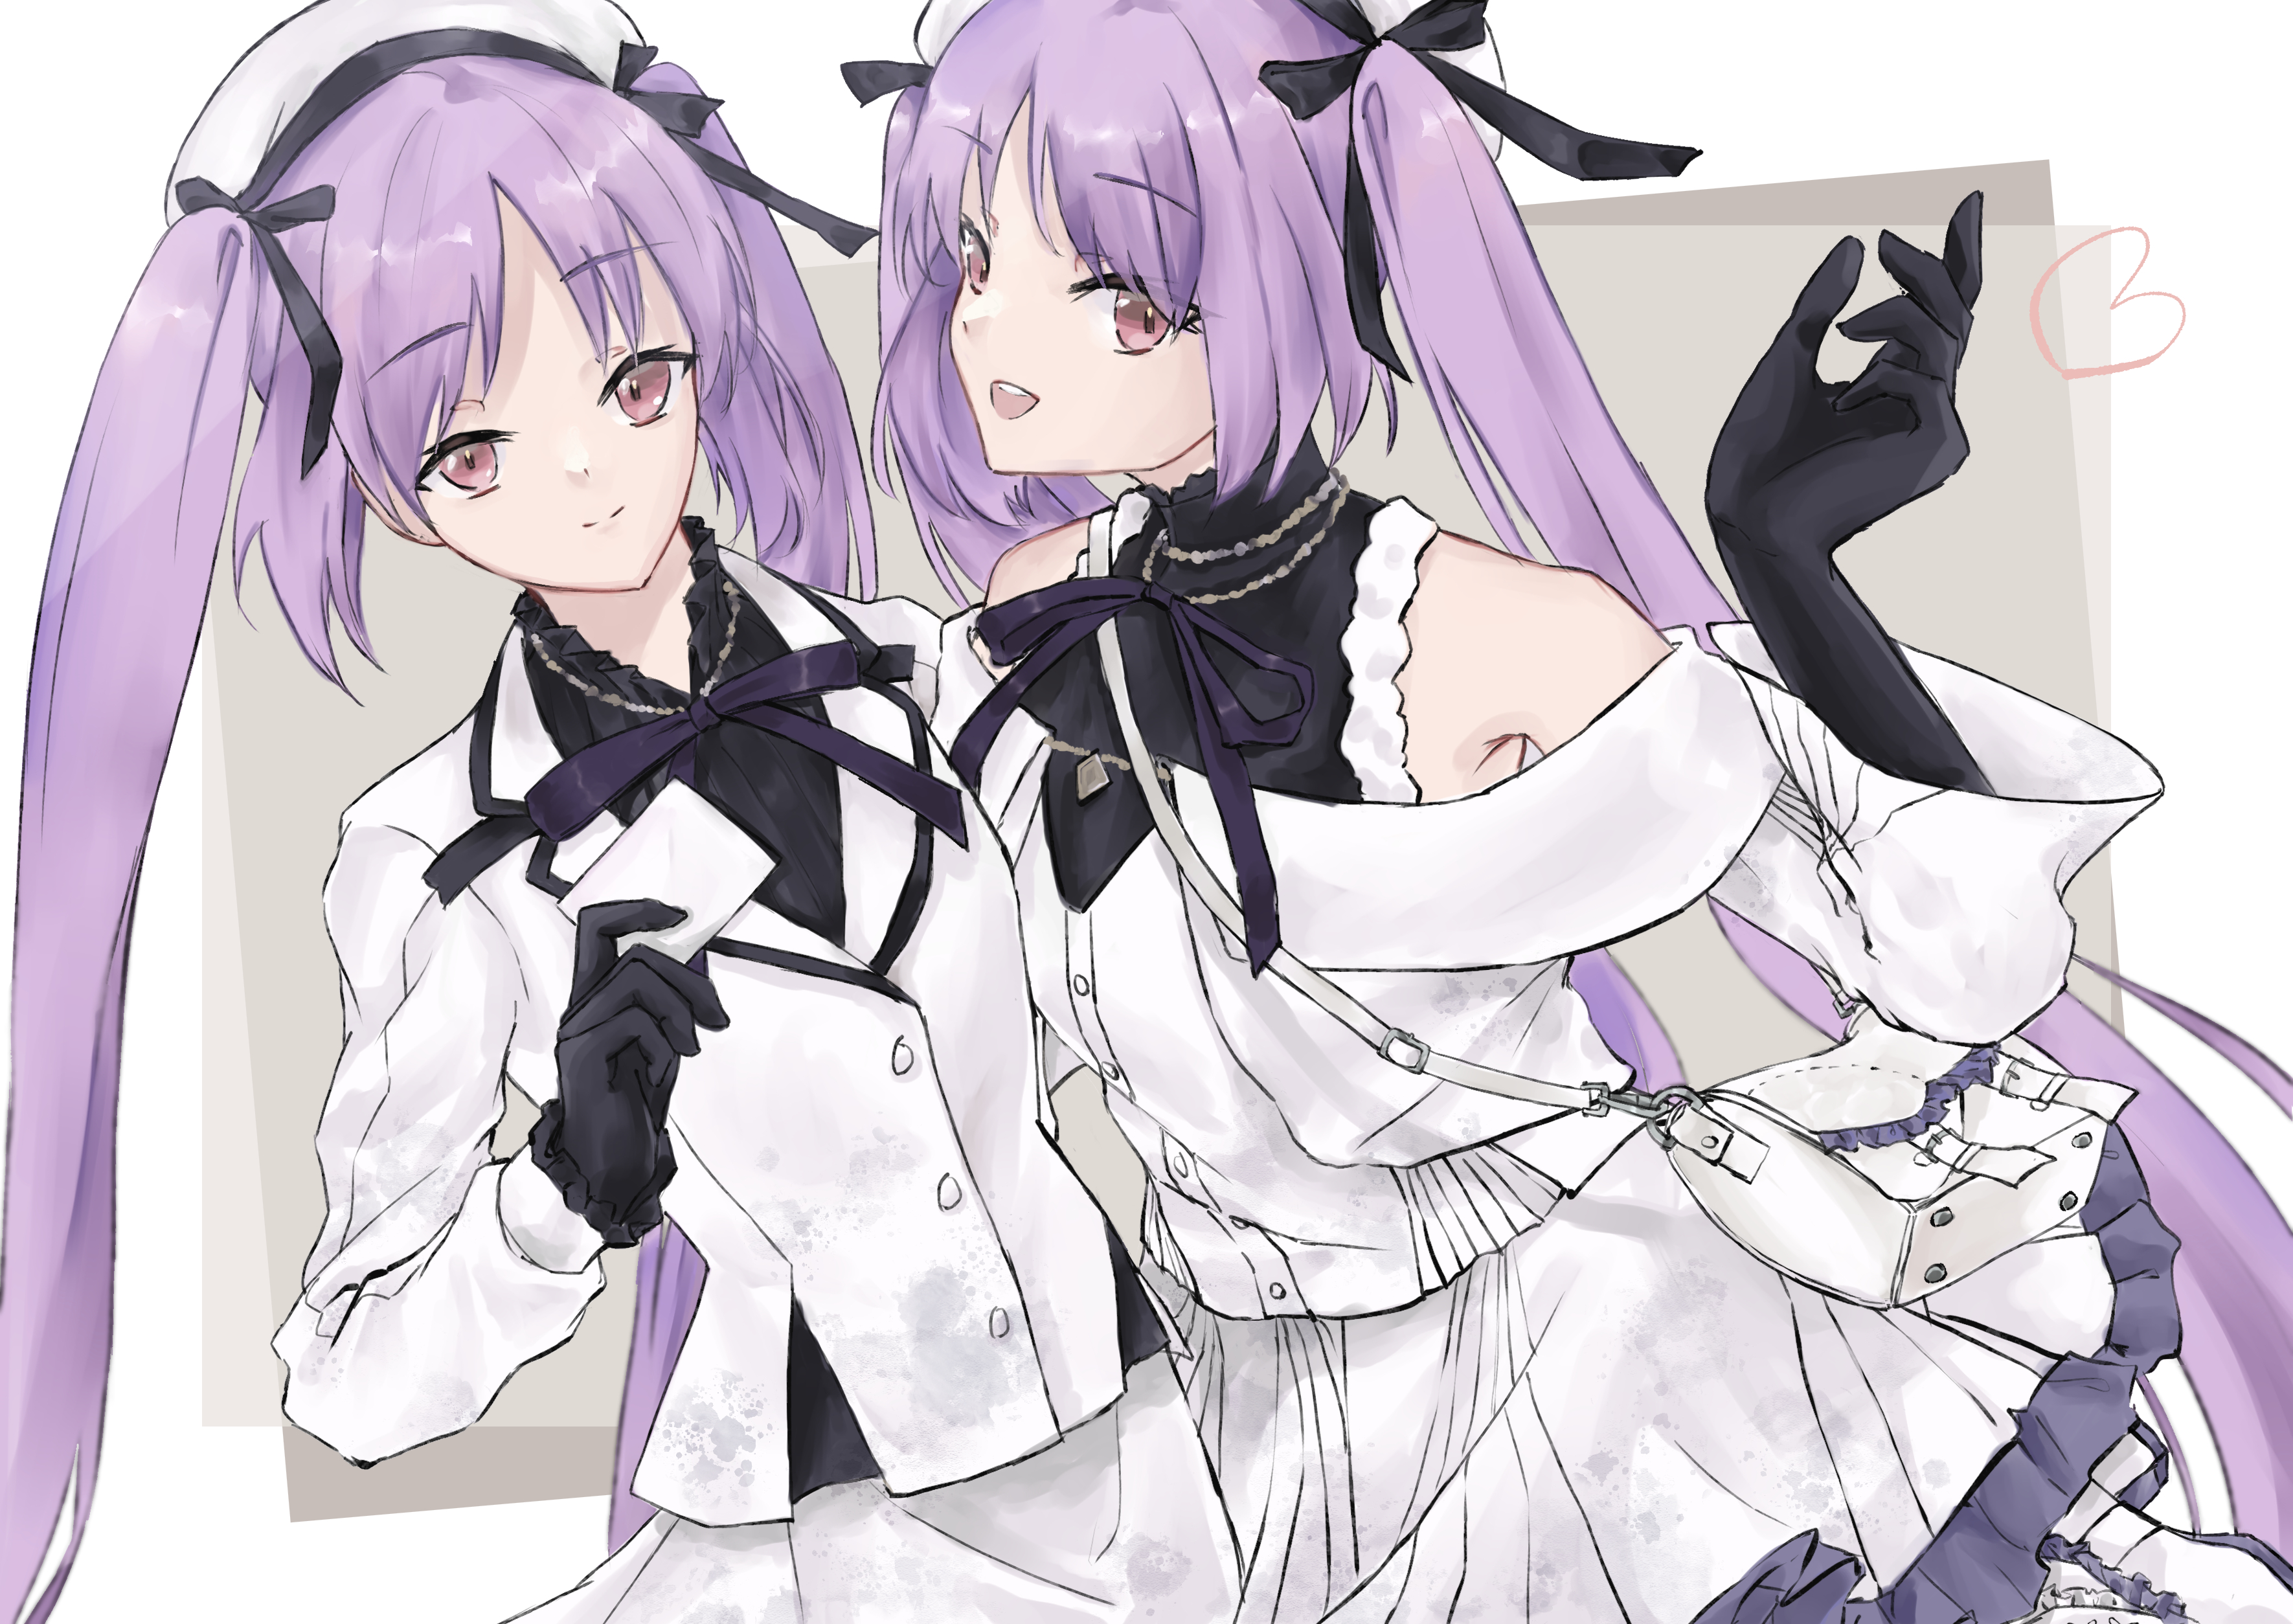 Anime 3541x2508 anime anime girls Fate series Fate/Hollow Ataraxia Fate/Grand Order Euryale (Fate/Grand Order) Stheno (Fate/Grand Order) twintails long hair purple hair two women twins artwork digital art fan art bow tie gloves smiling looking at viewer uniform